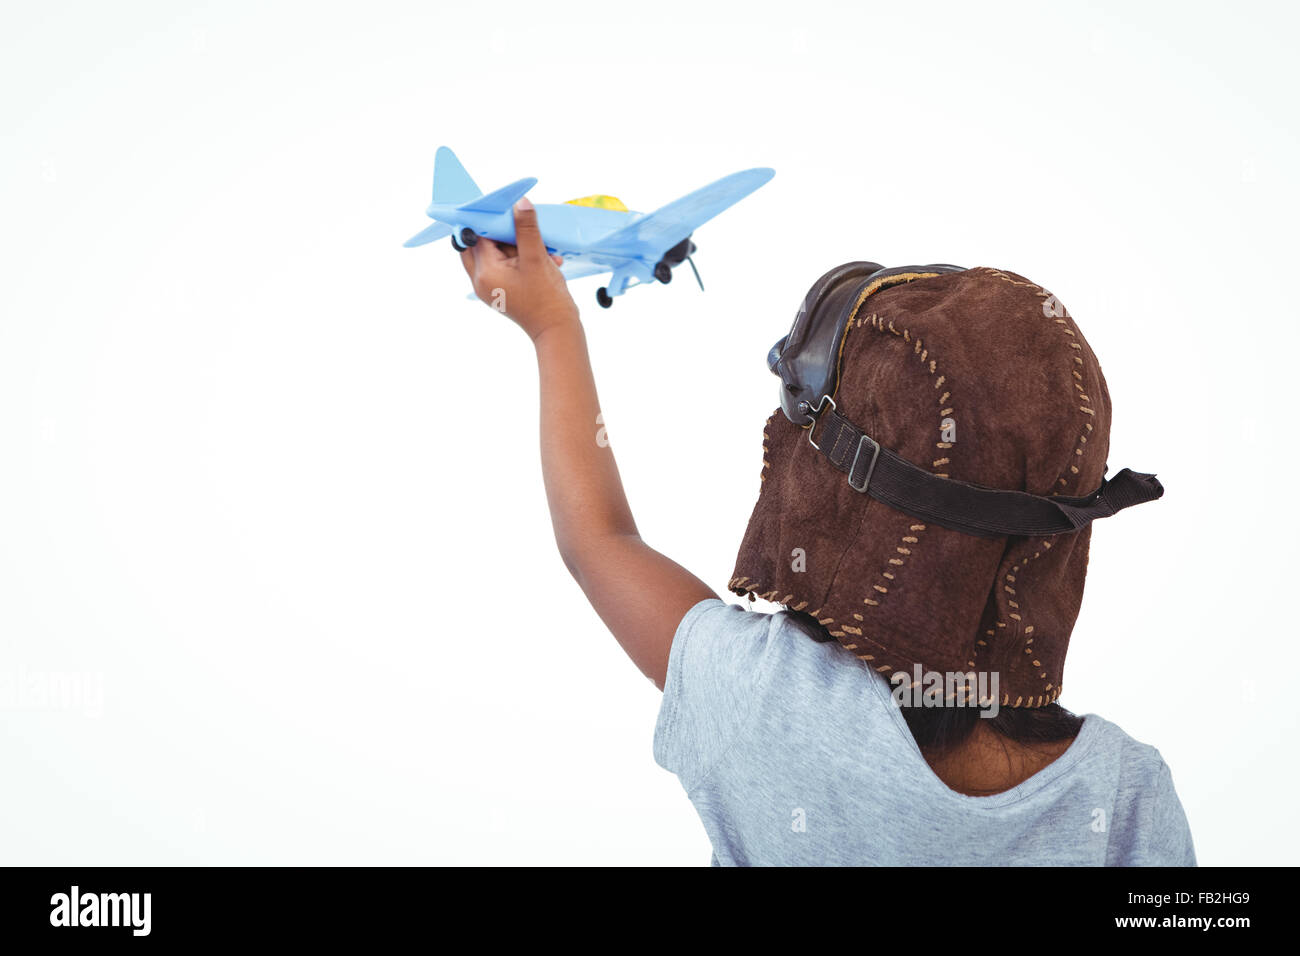 Article girl Playing with toy airplane Banque D'Images